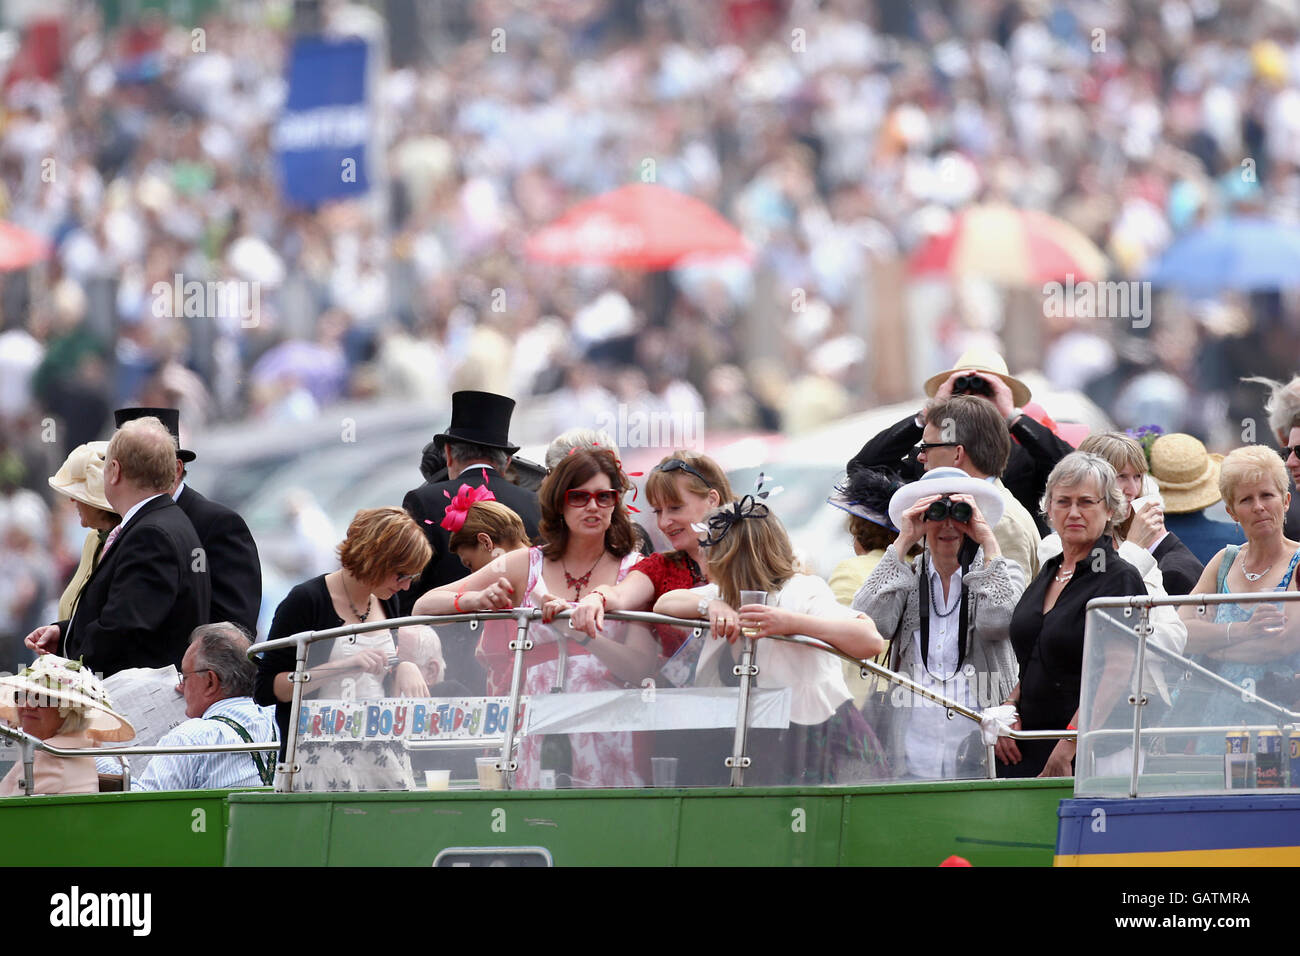 Horse Racing - The 2008 Derby Festival - Derby Day - Epsom Downs Racecourse. Racegoers at Epsom Downs Racecourse on Derby Day Stock Photo